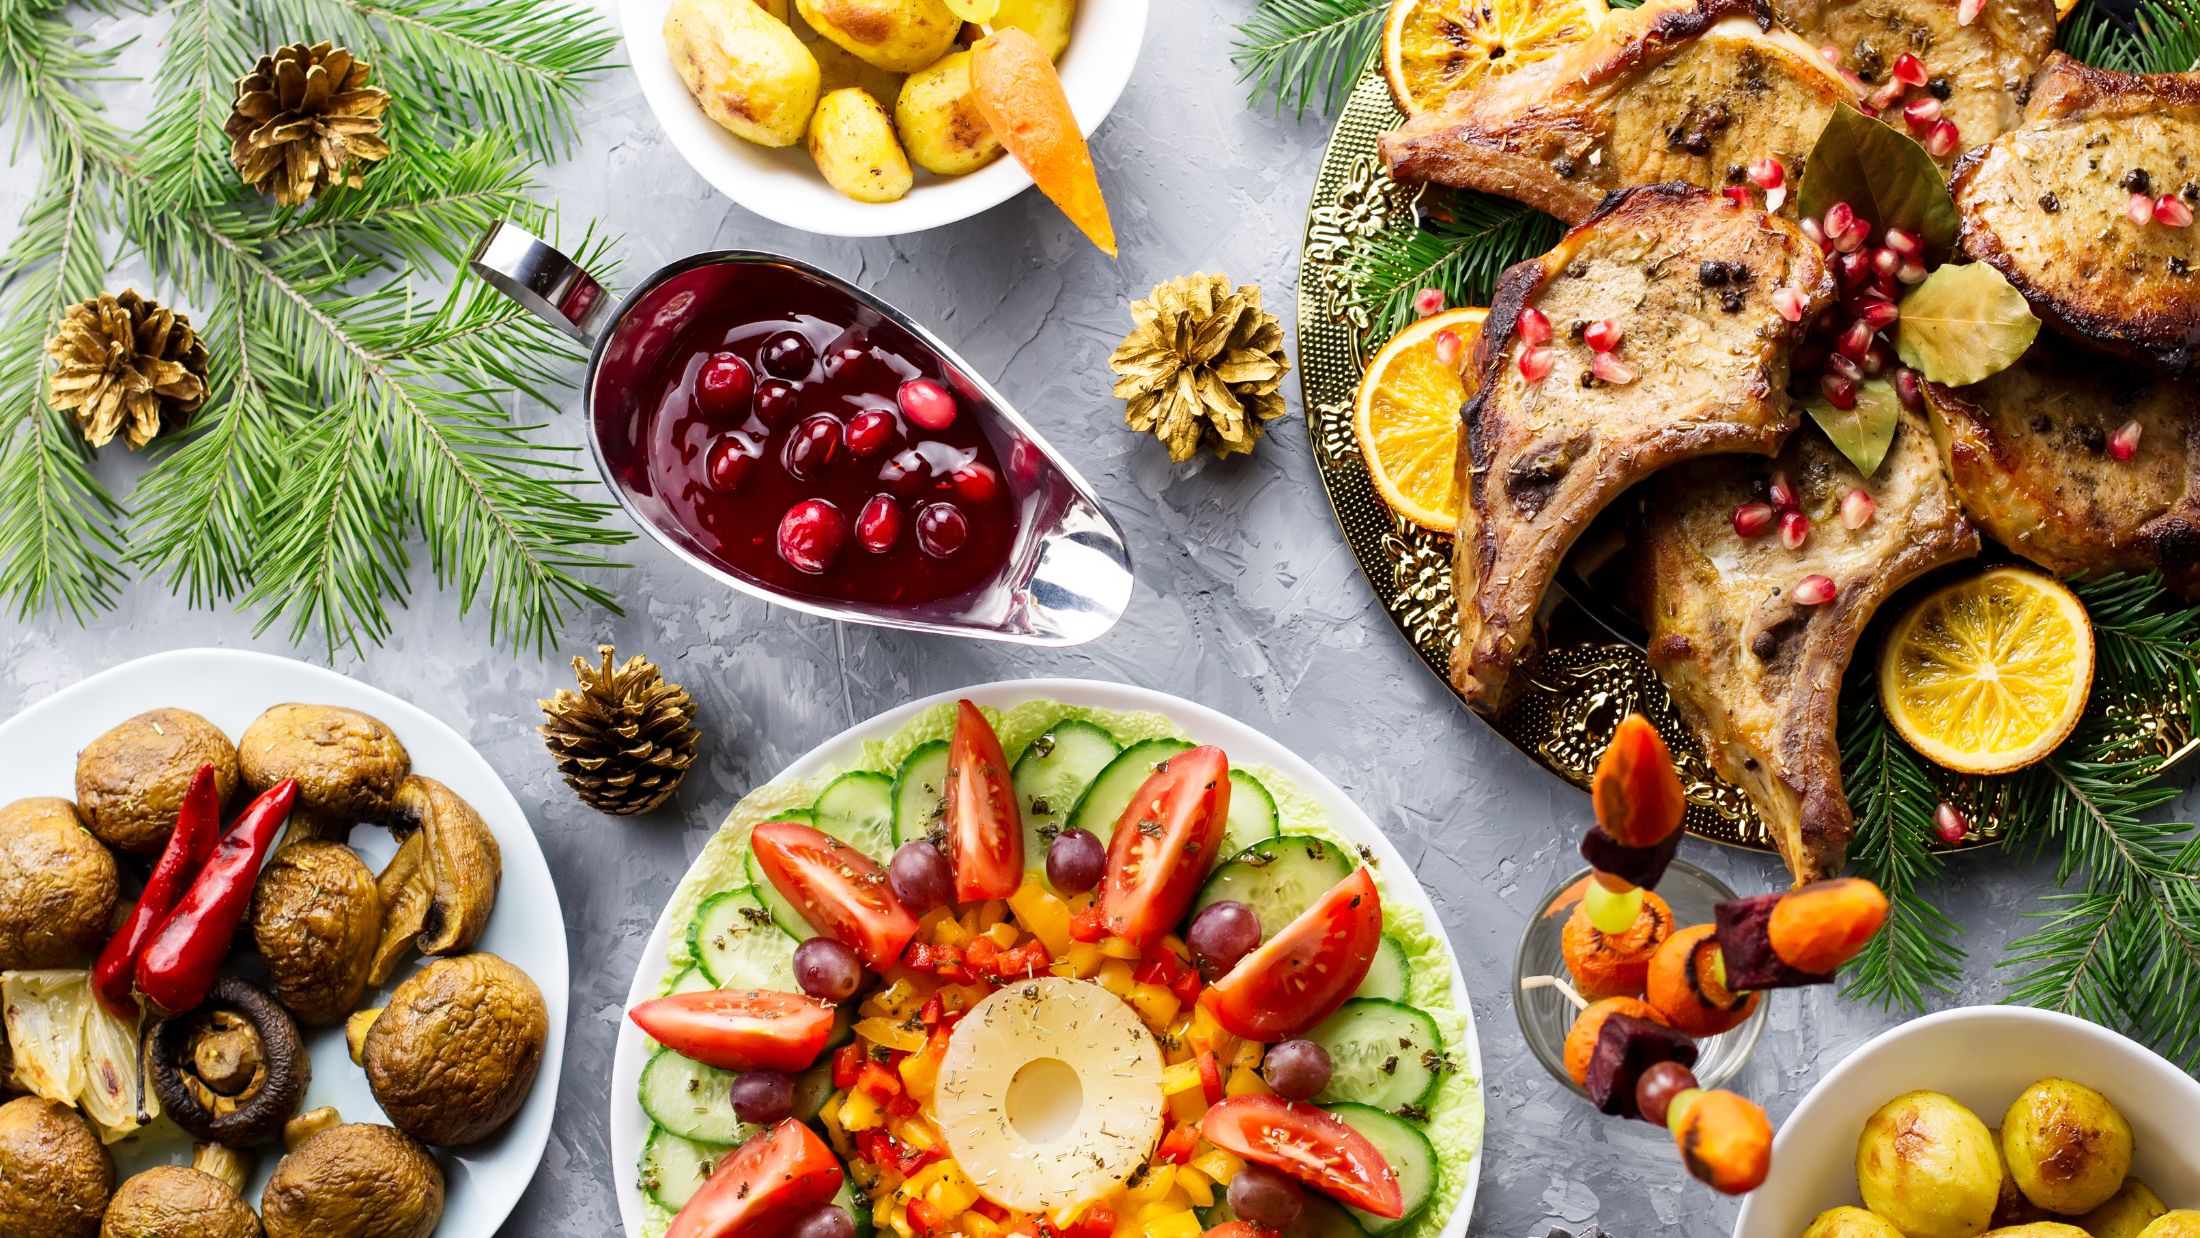 6 Tips for How to Stay healthy during holidays